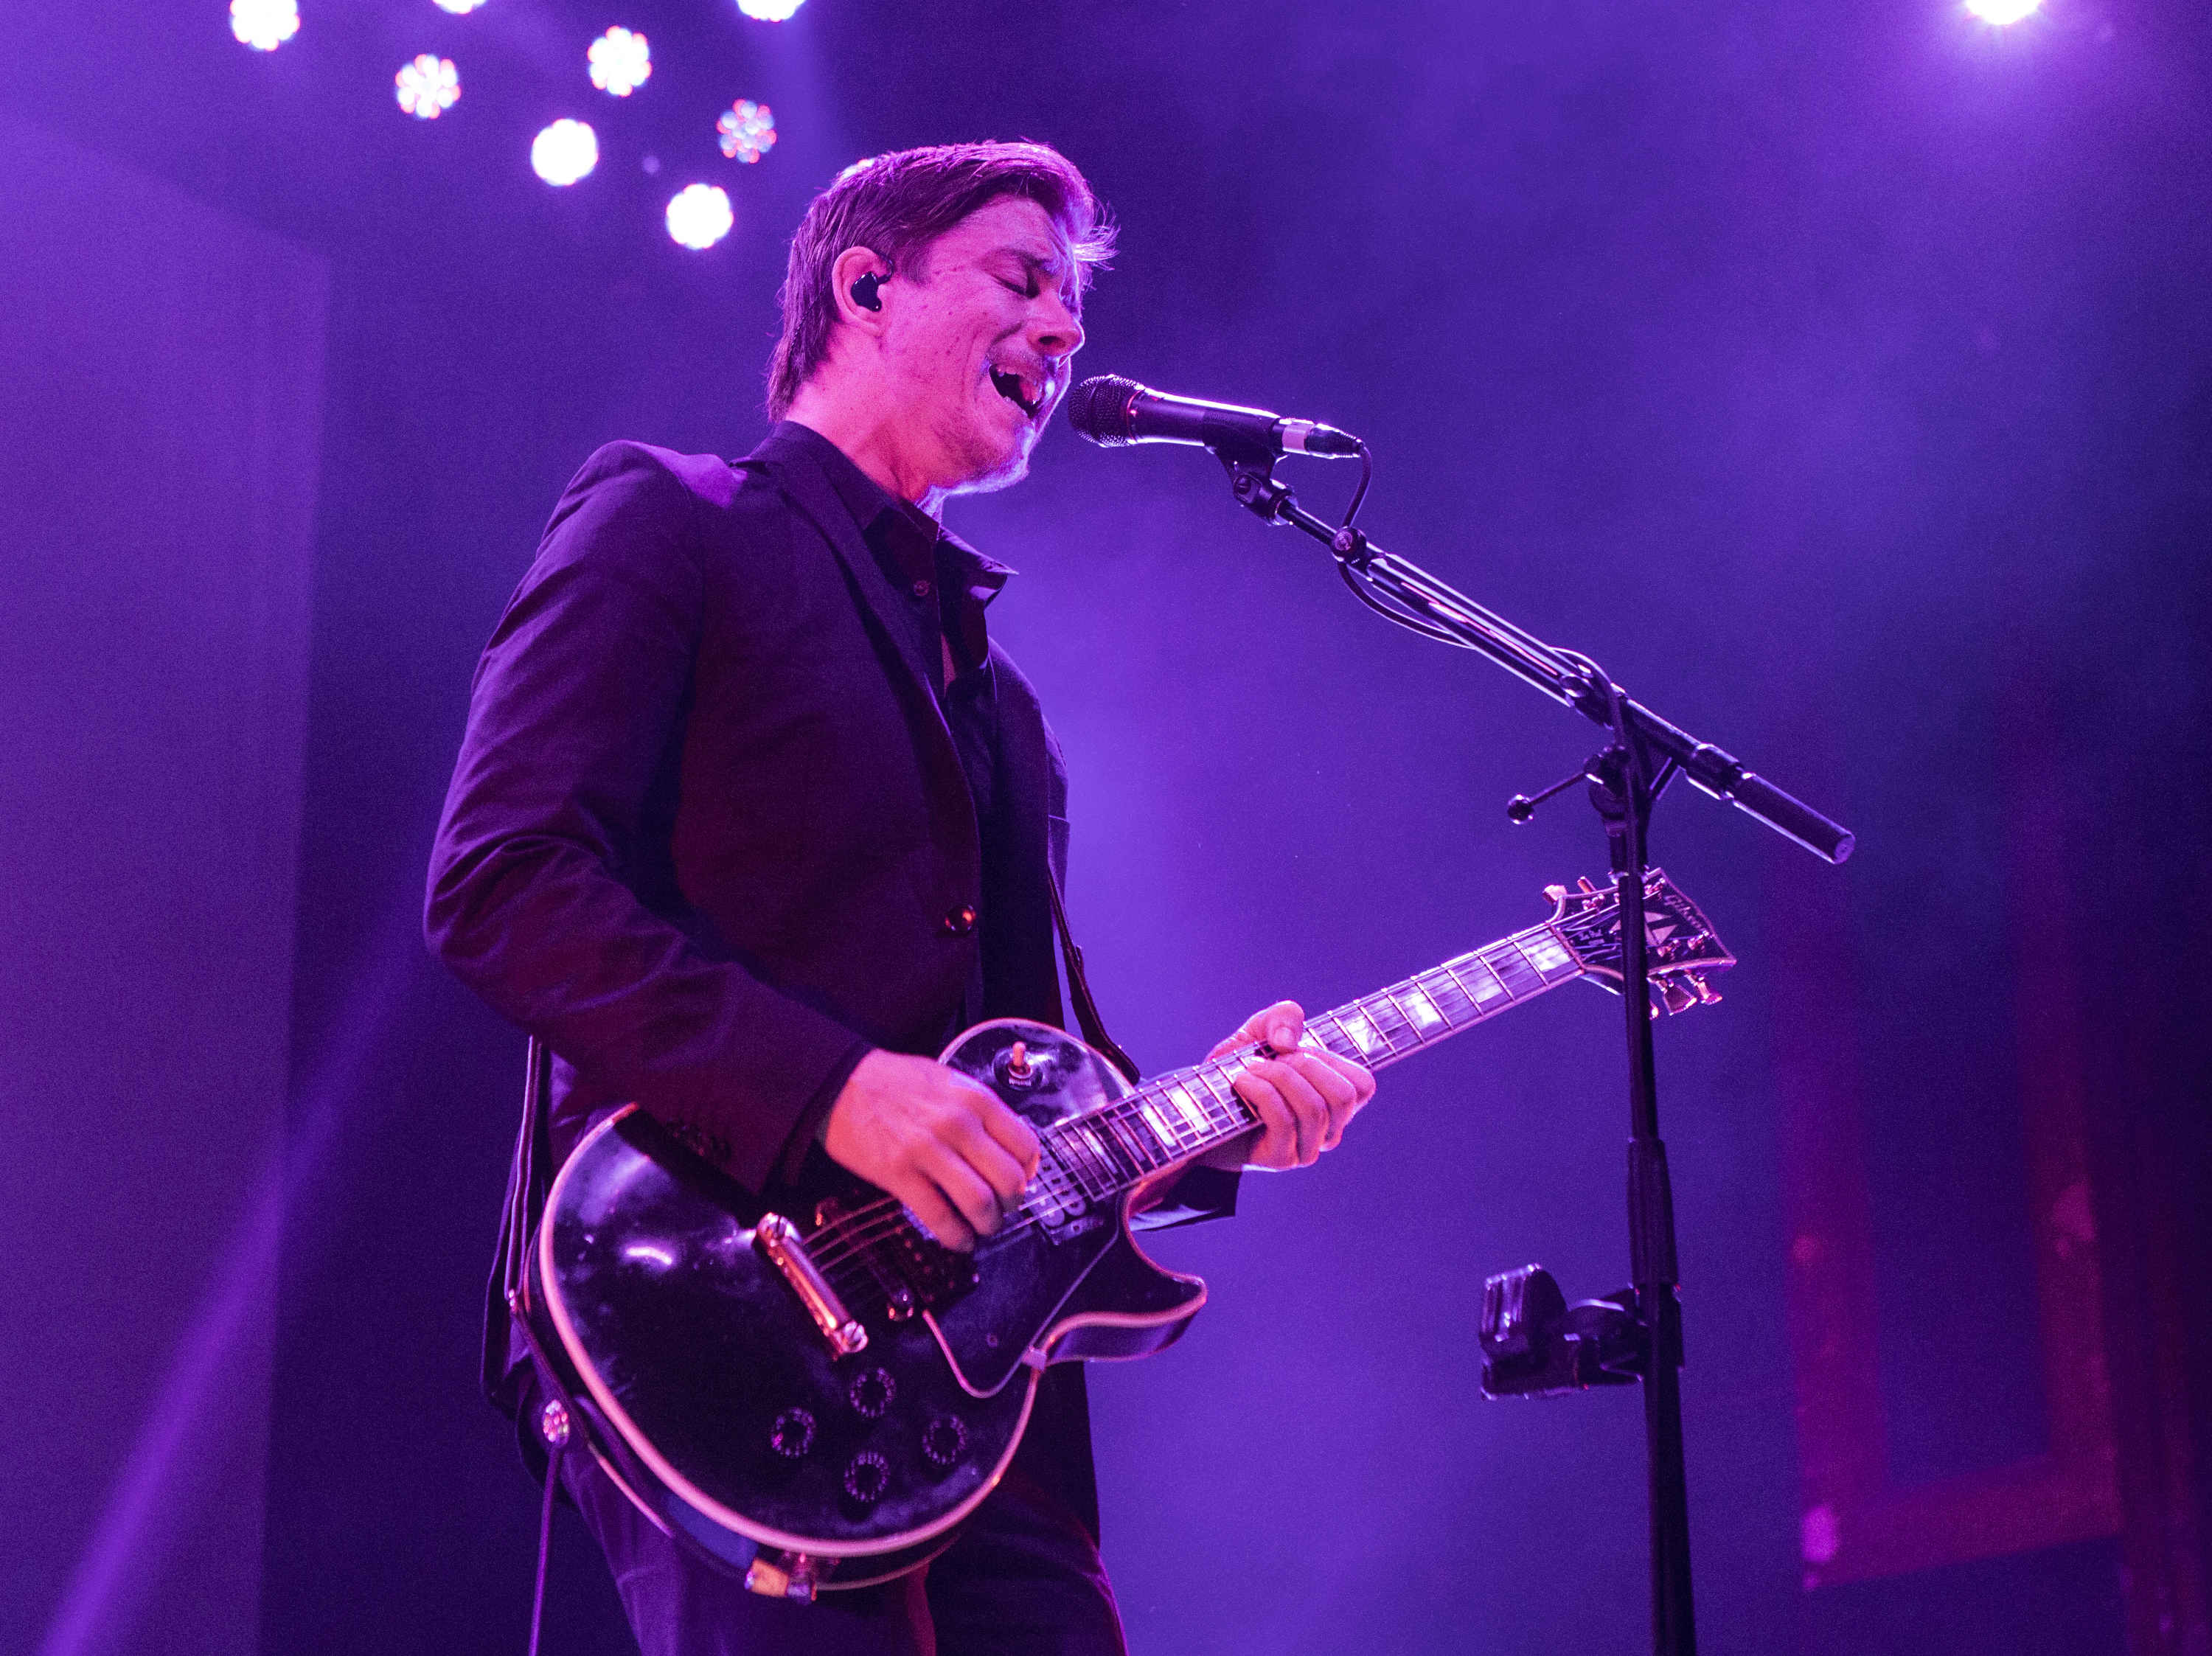 Paul Banks with Interpol perform at the Tabernacle in Atlanta on Nov. 10, 2014 (Katie Darby—Invision/AP)